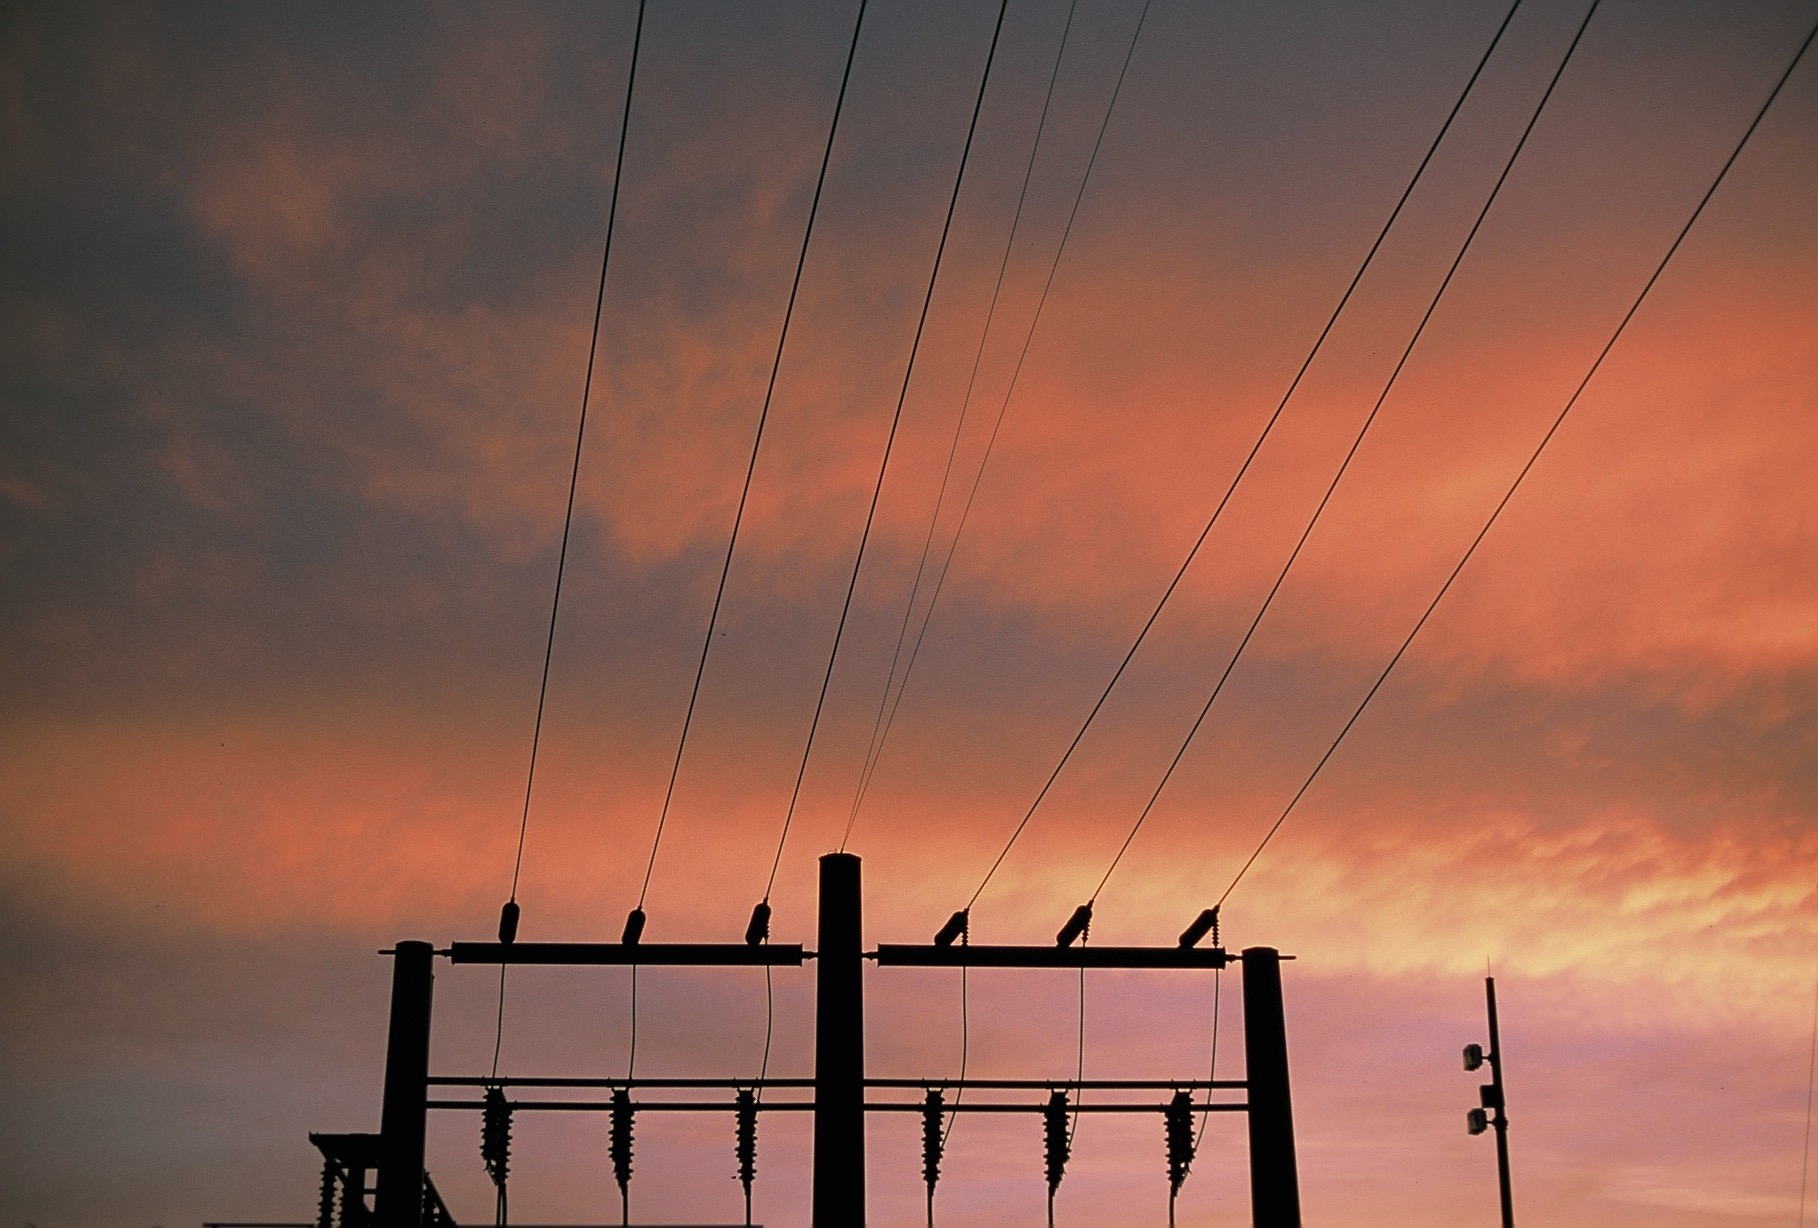 Sunset at powerlines